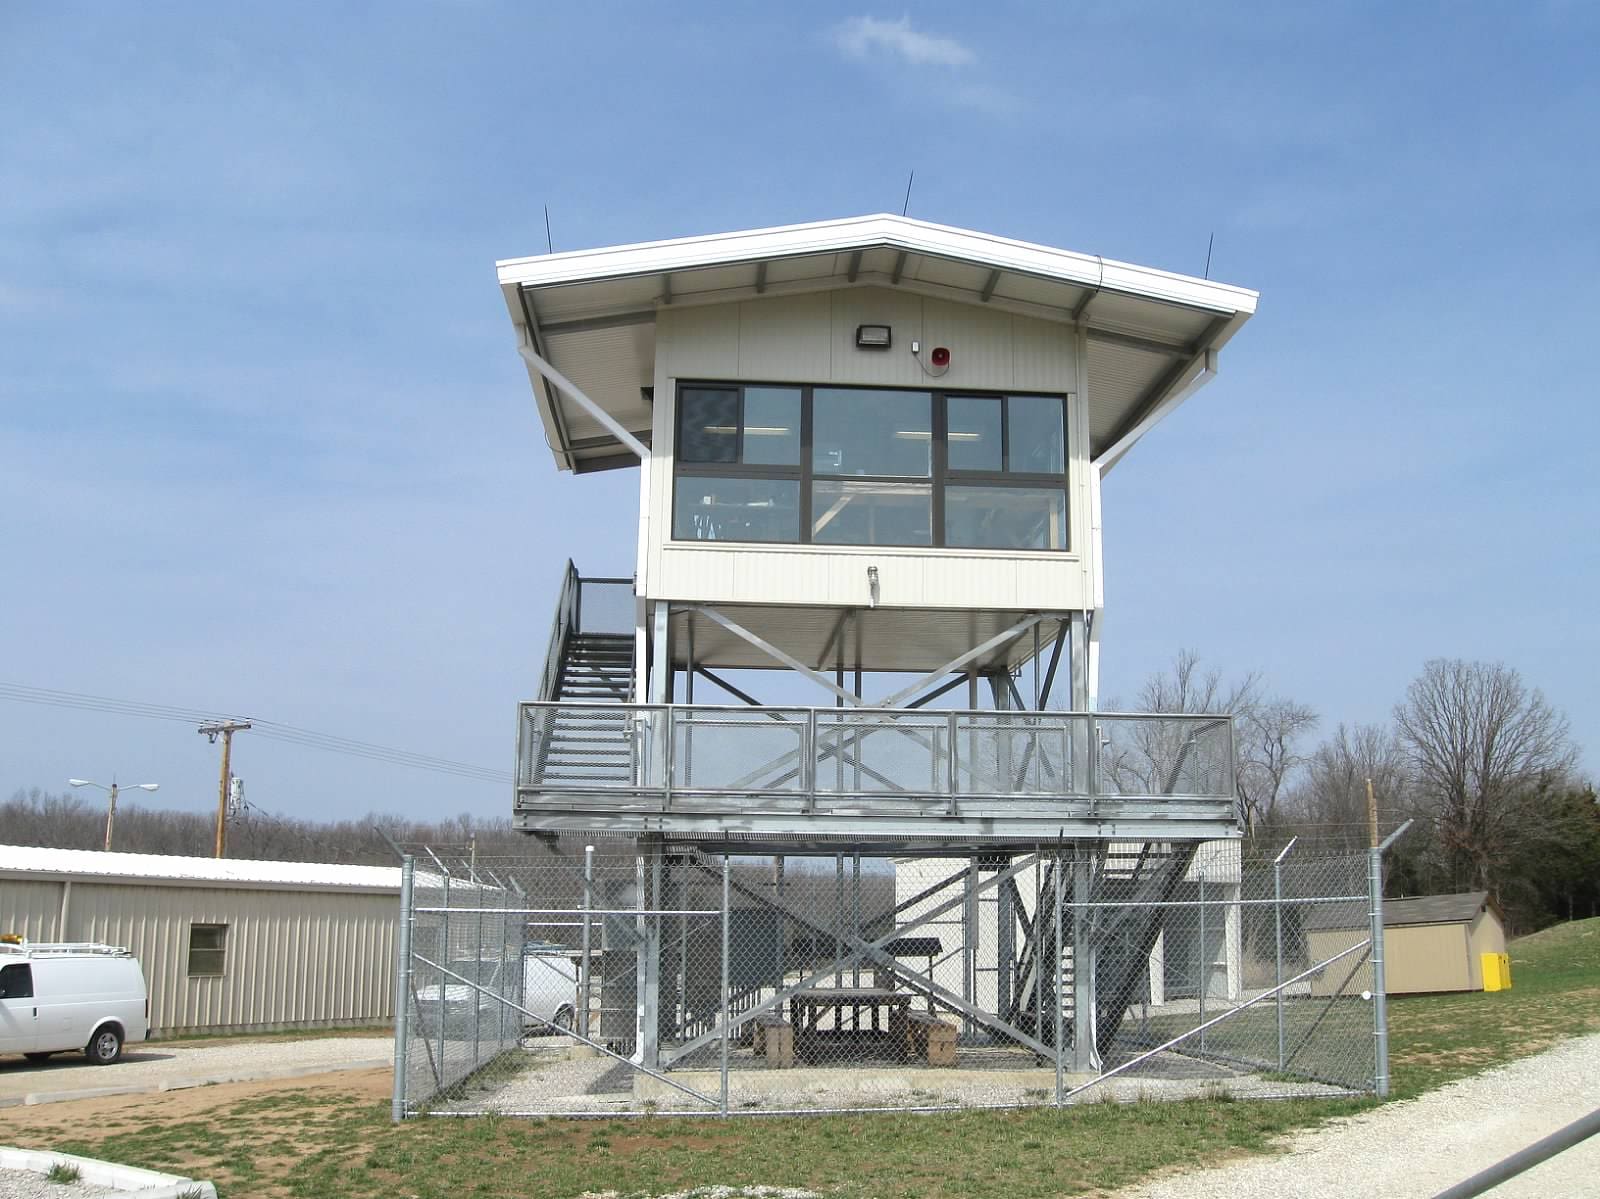 Elevated control tower with metal staircase on a clear day.